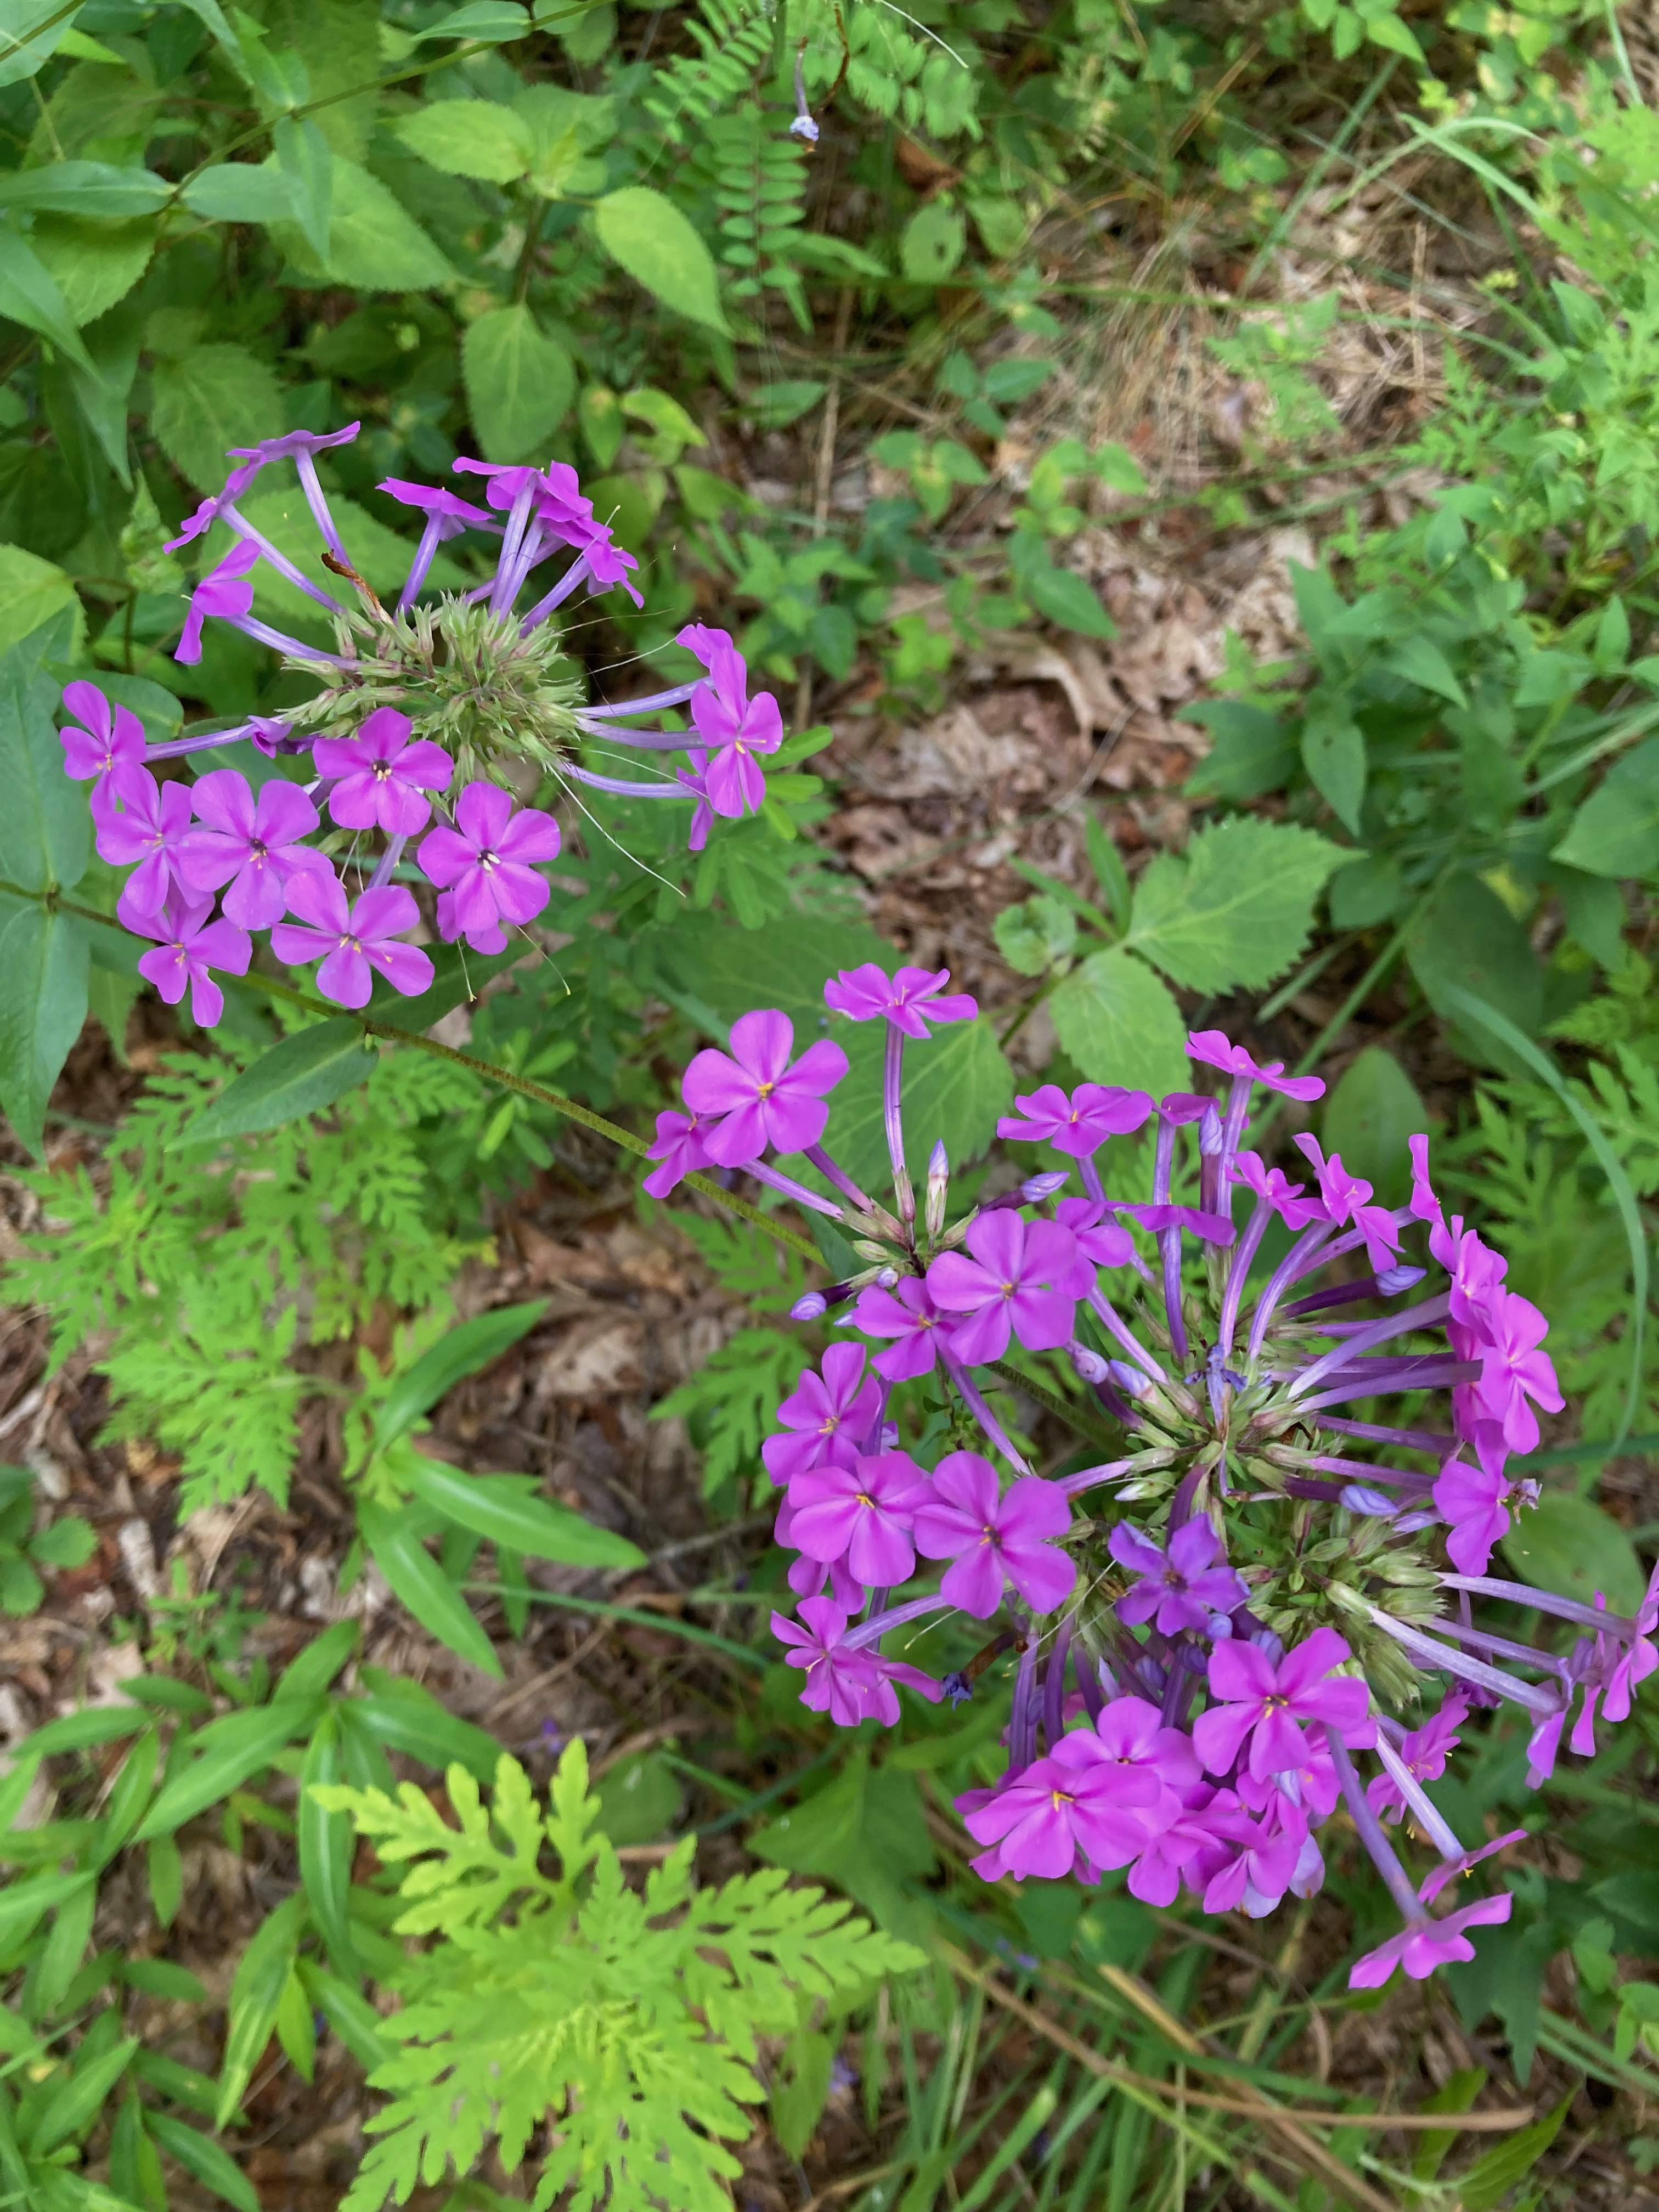 The Scientific Name is Phlox carolina. You will likely hear them called Carolina Phlox, Thick-leaf Phlox, Giant Phlox, Summer Phlox. This picture shows the Rounded inflorescence- flowers appear to be originating from the same place. of Phlox carolina